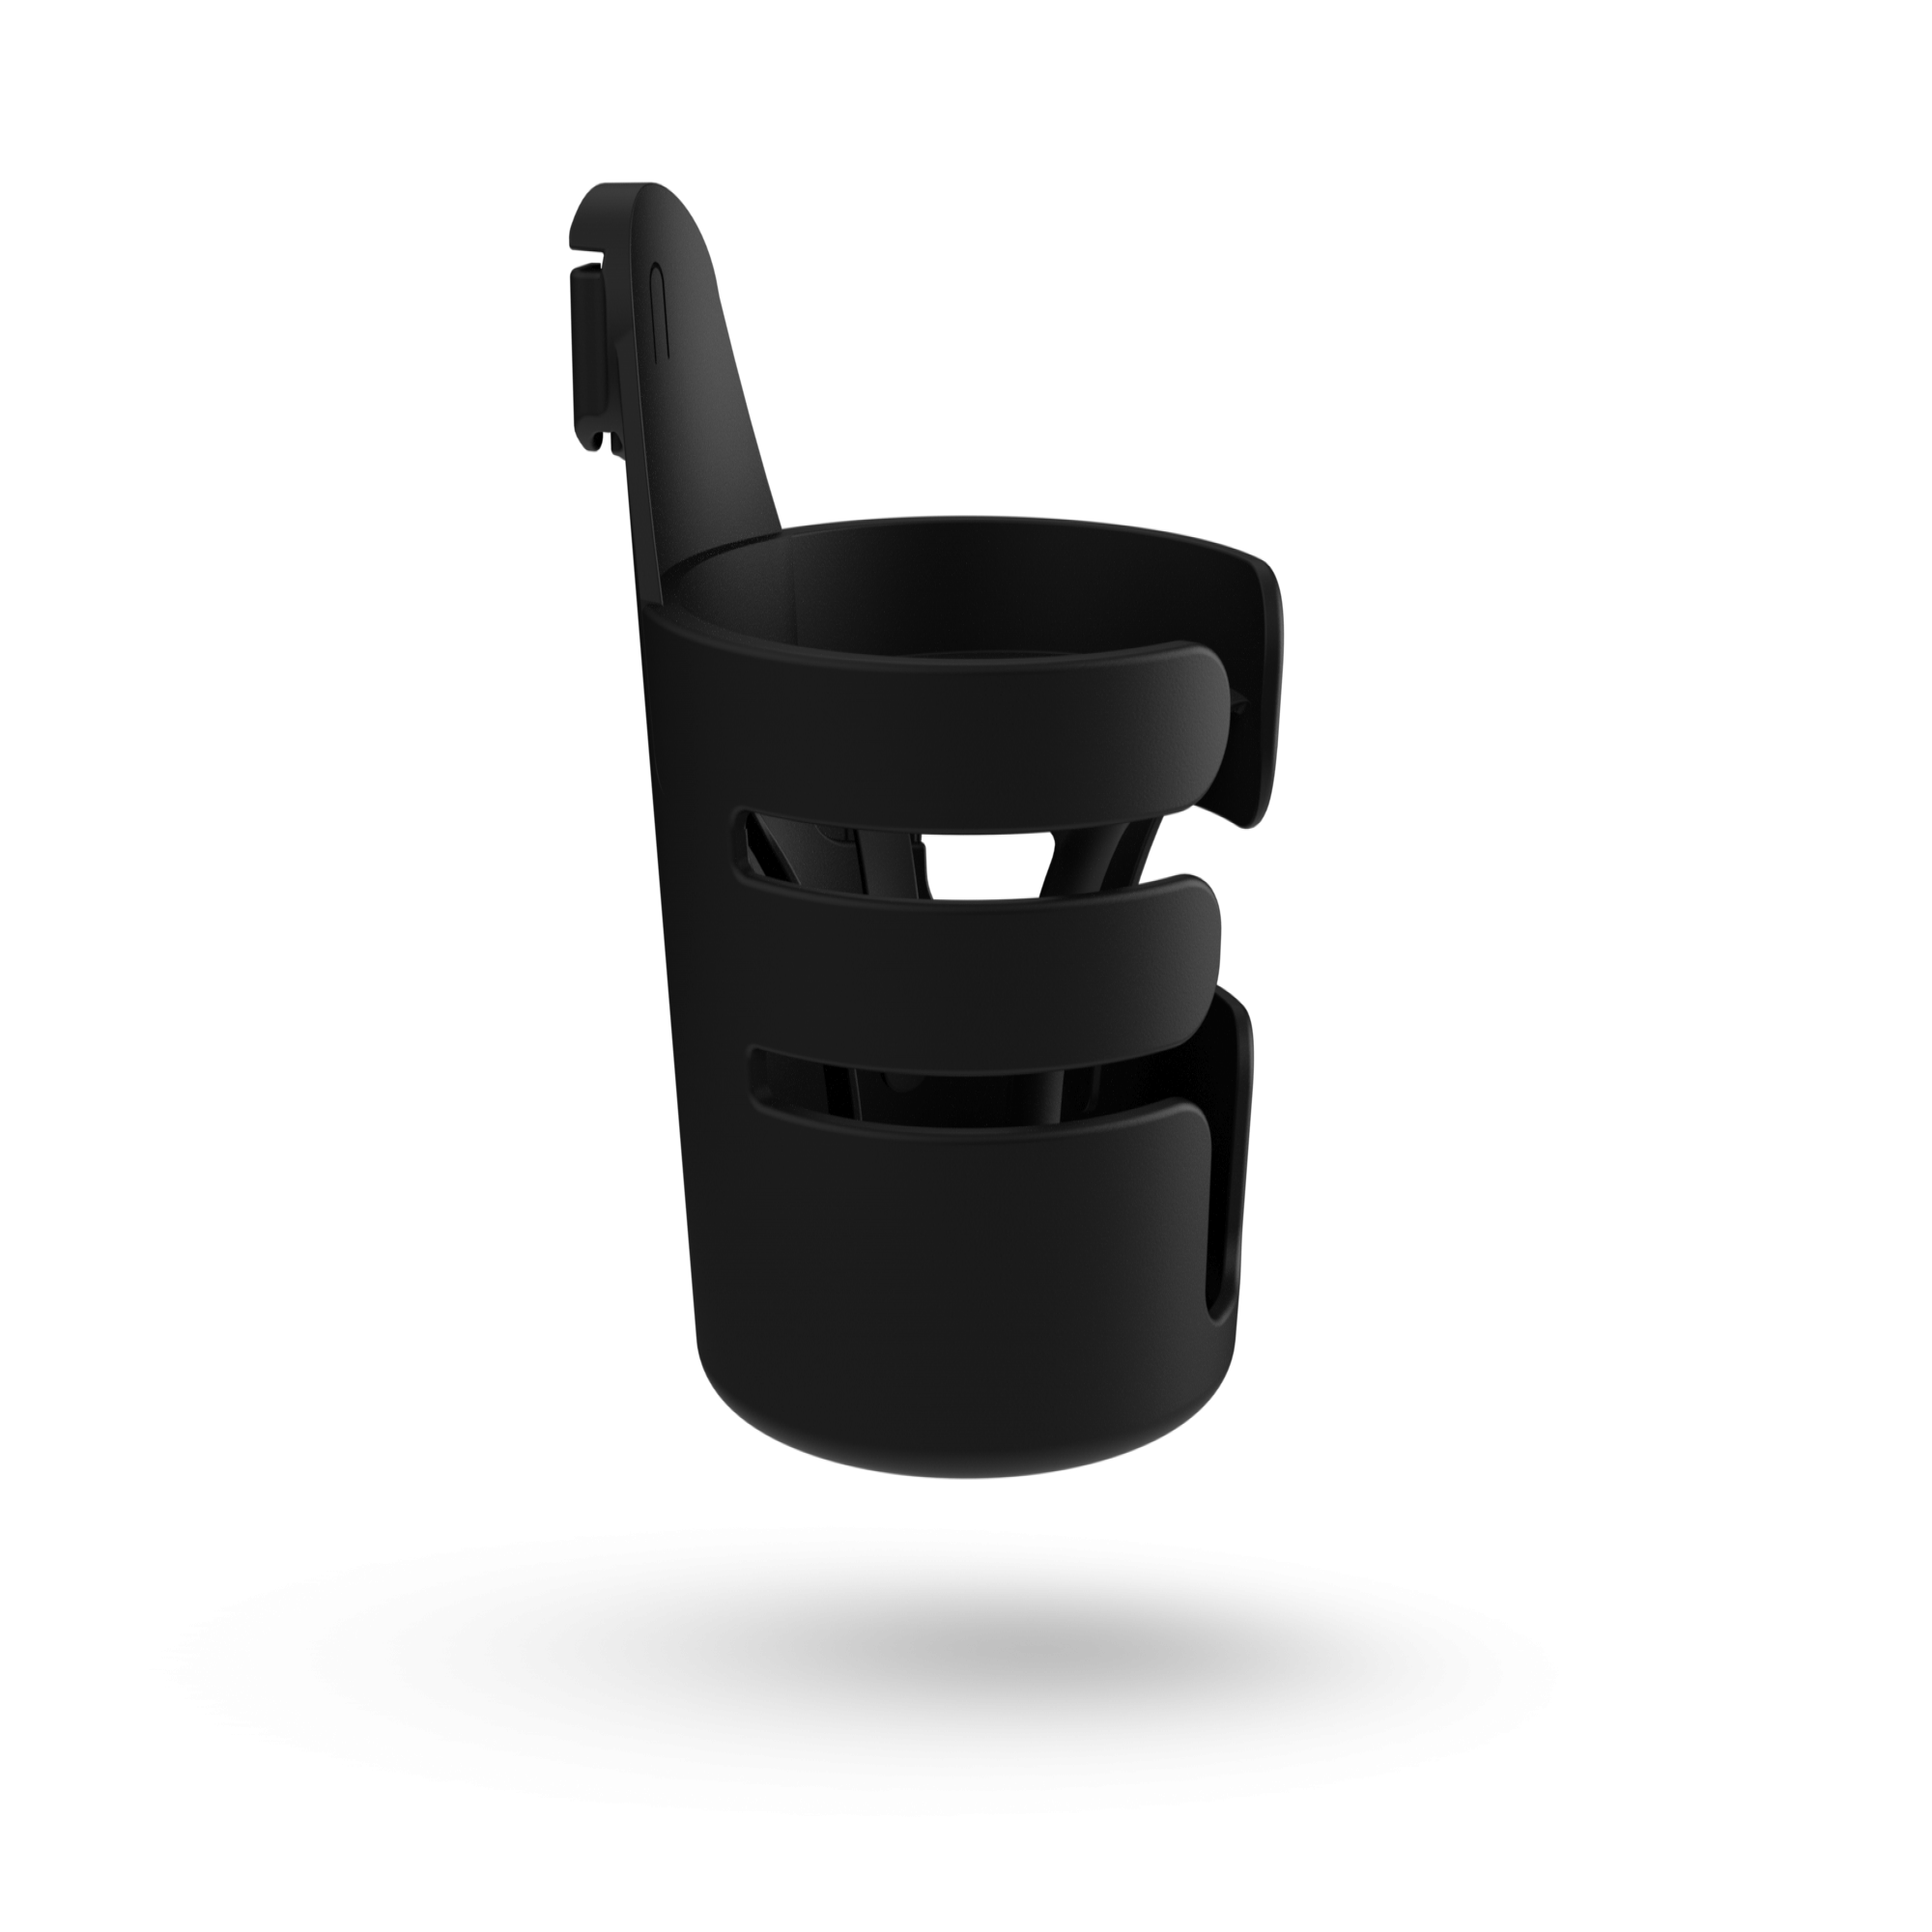 bugaboo bee 3 cup holder